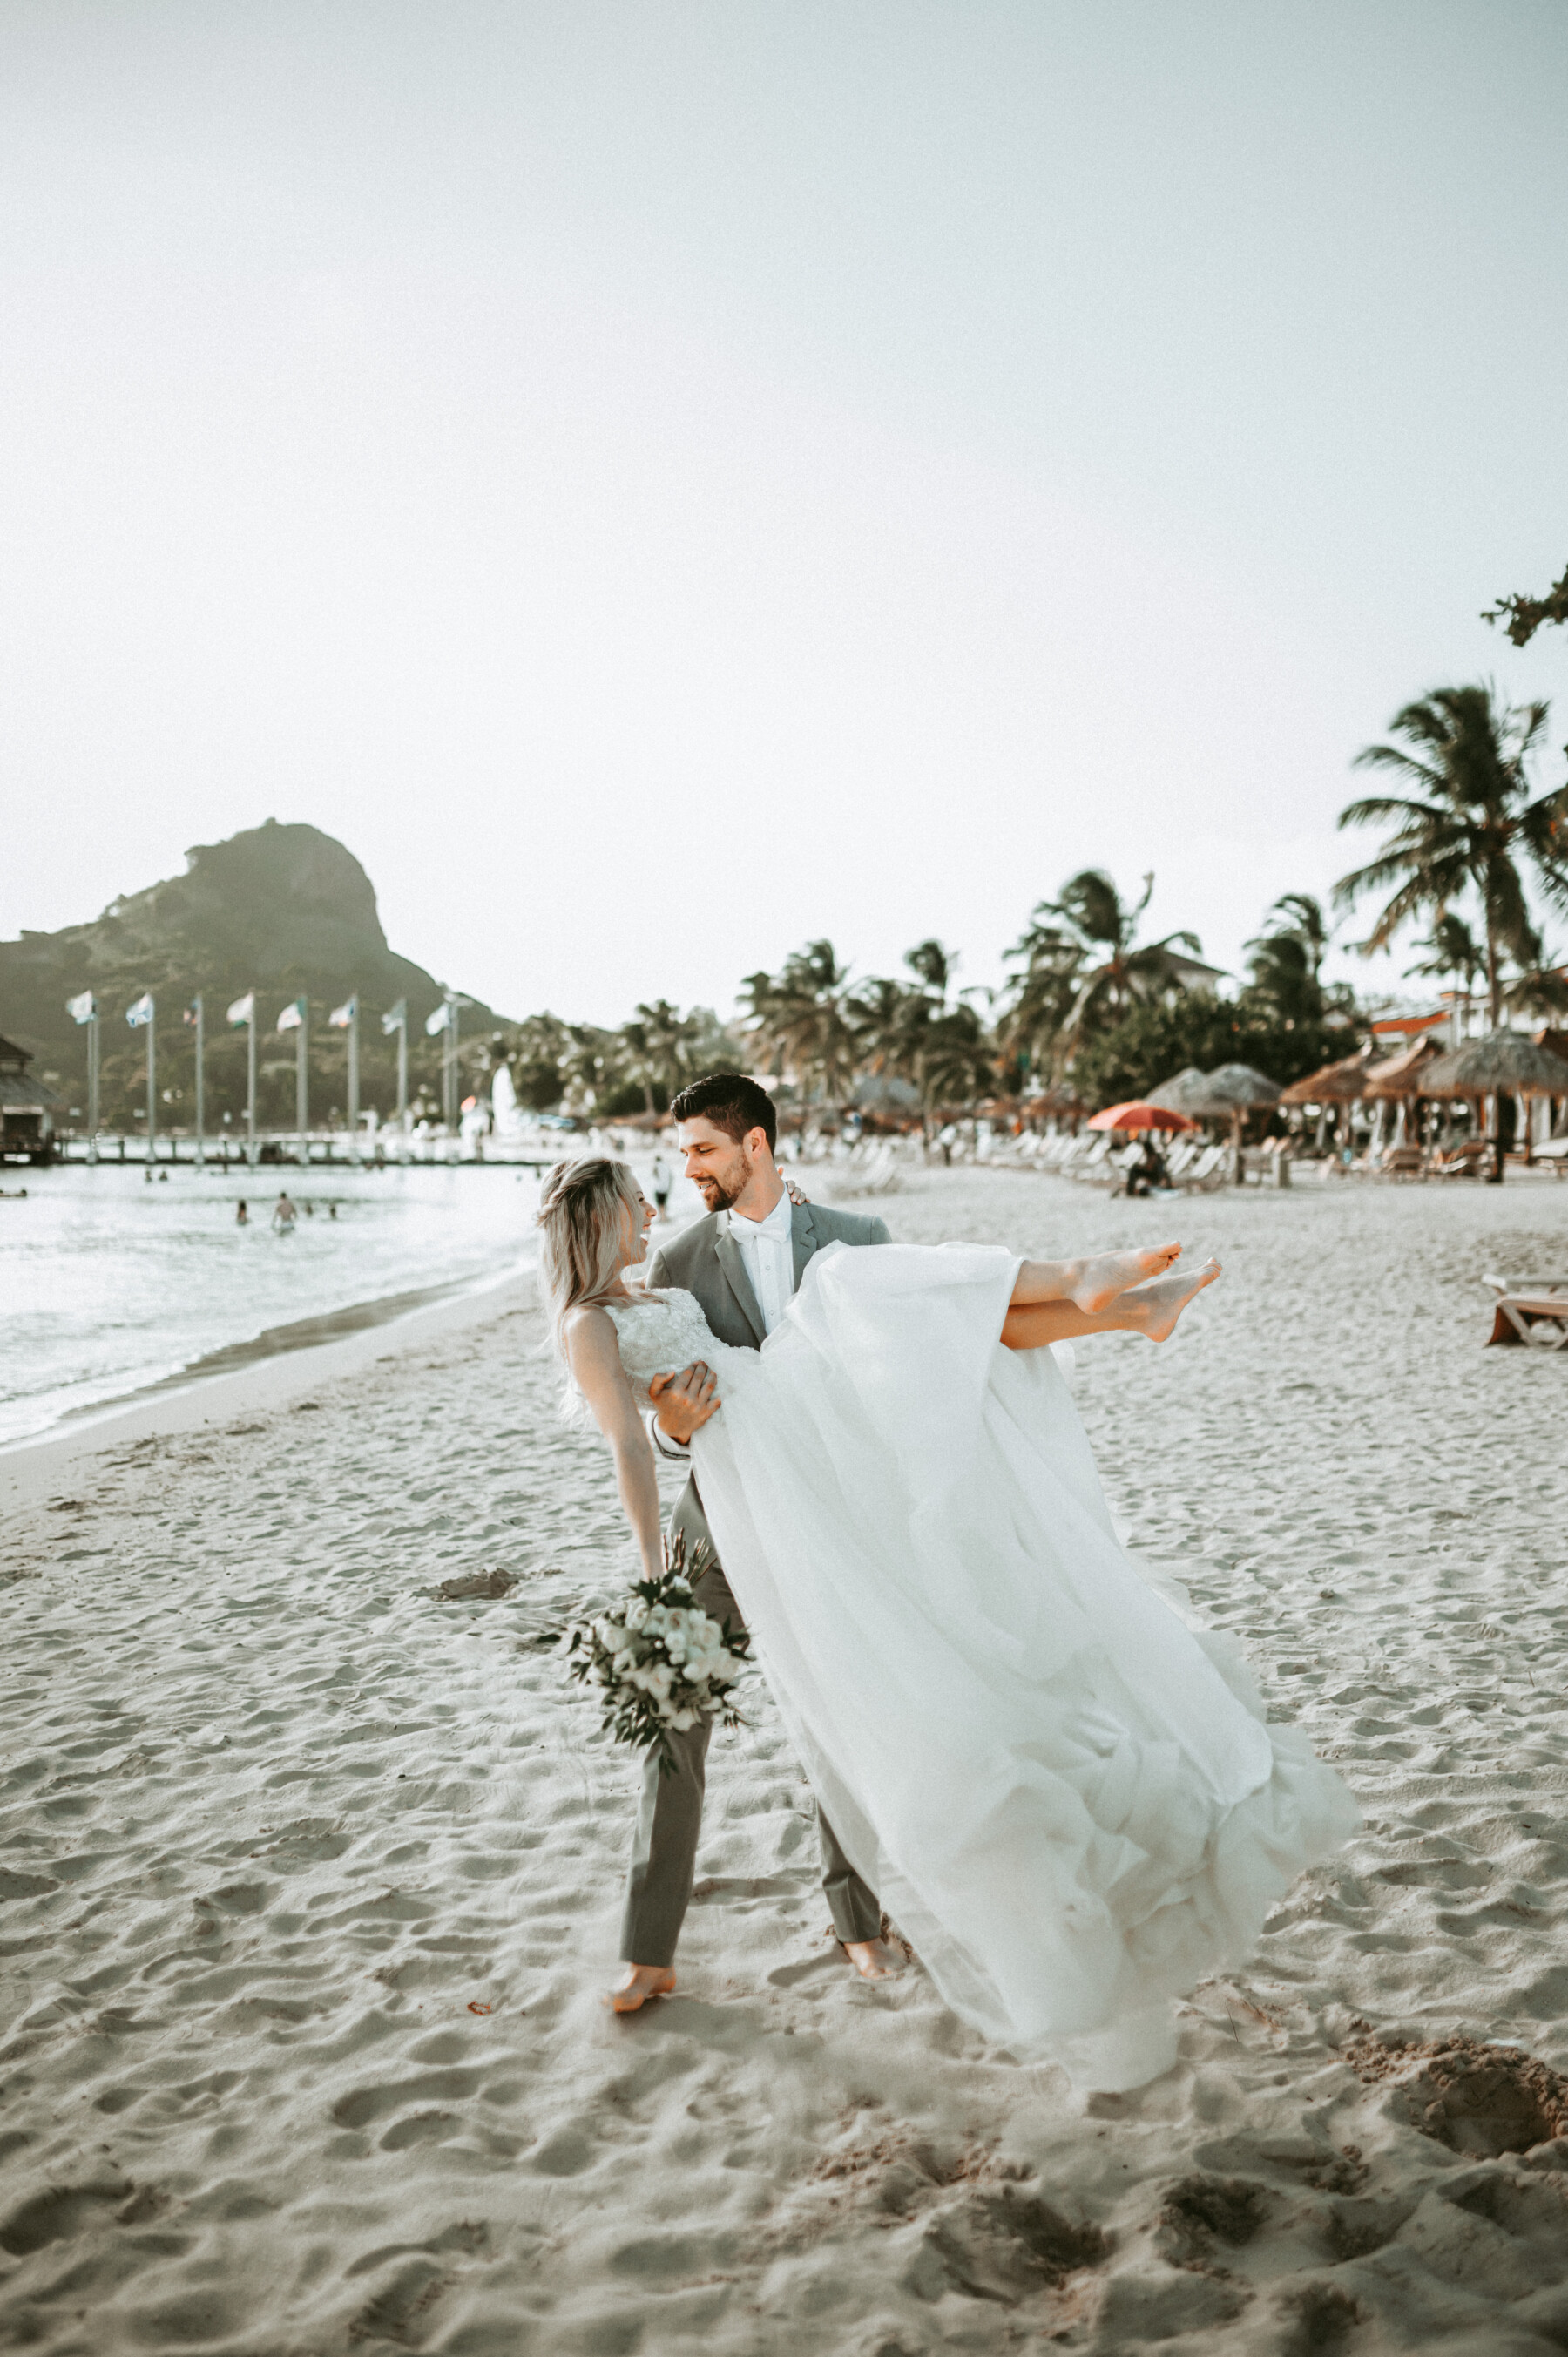 Test Drive Your Destination Wedding at a Resort from 2 Travel Anywhere